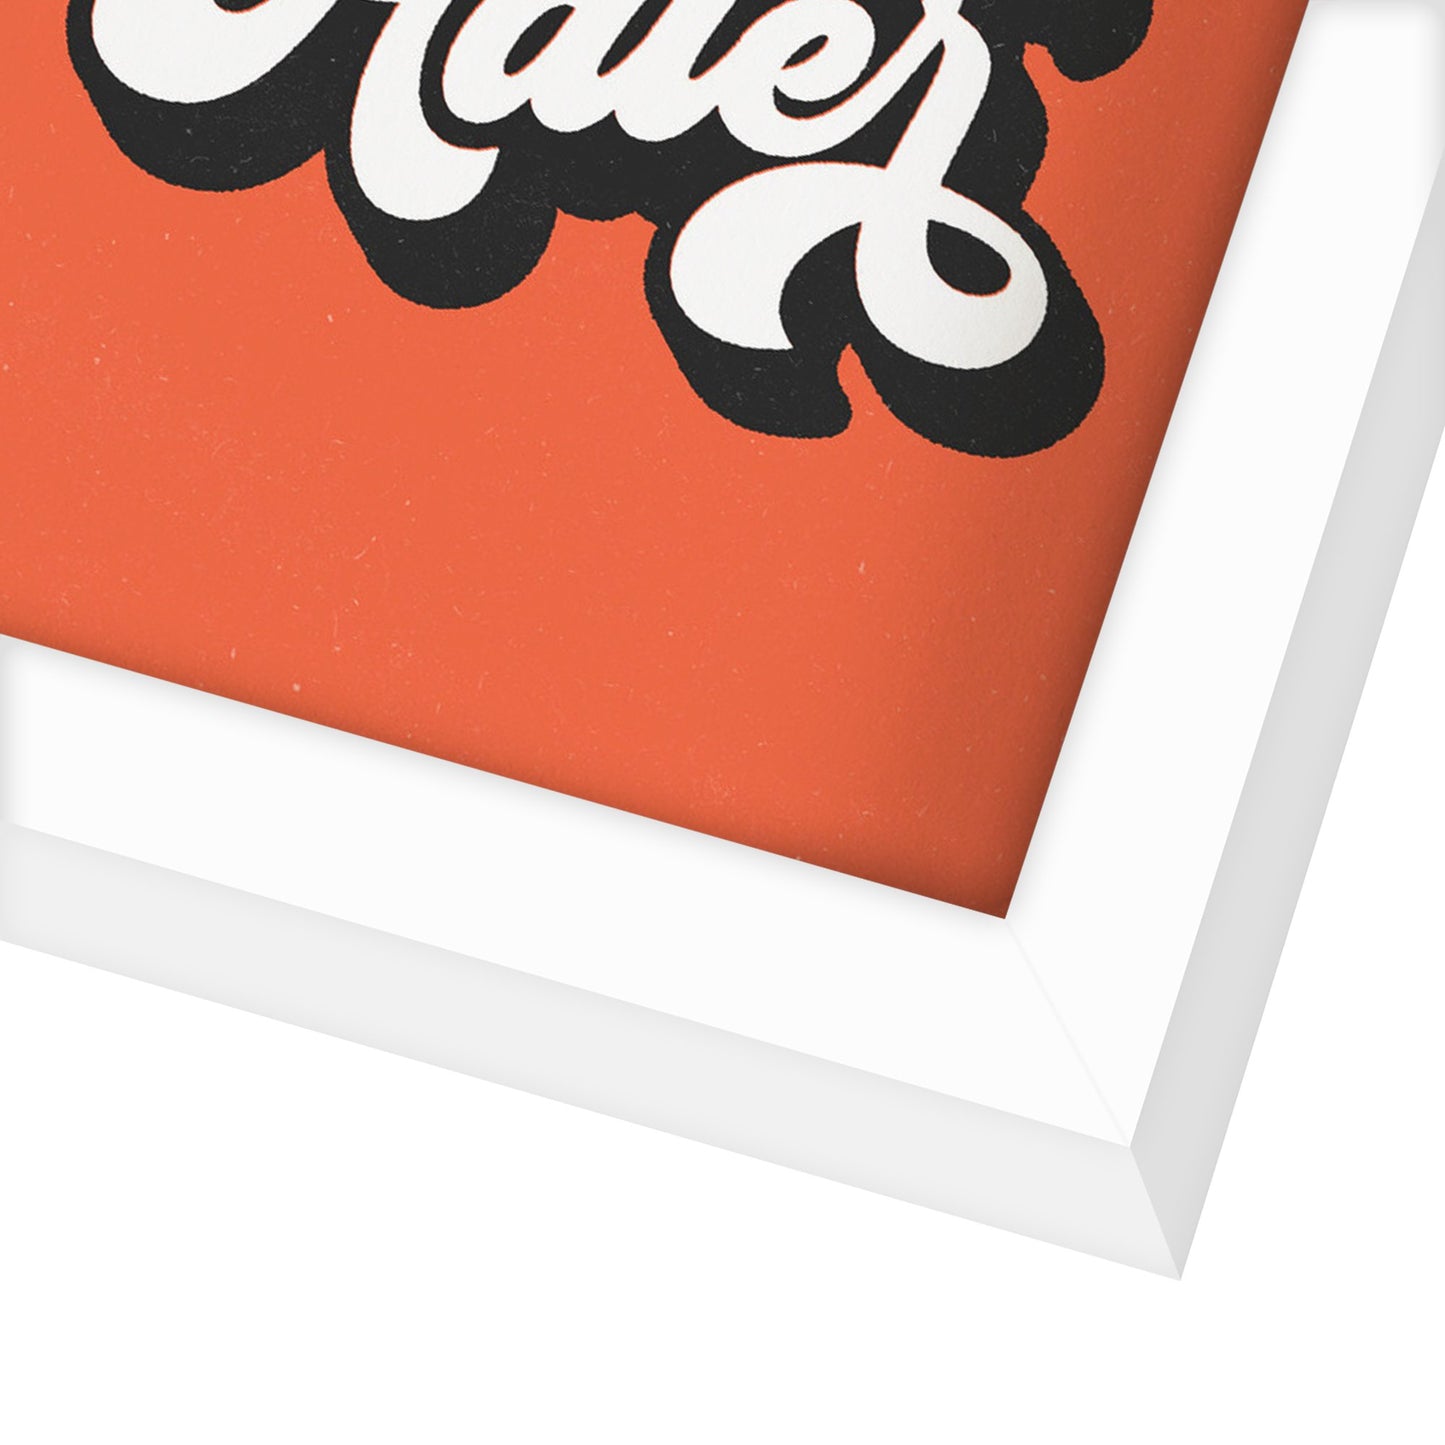 Later Hater By Motivated Type - Shadow Box Framed Art - Americanflat